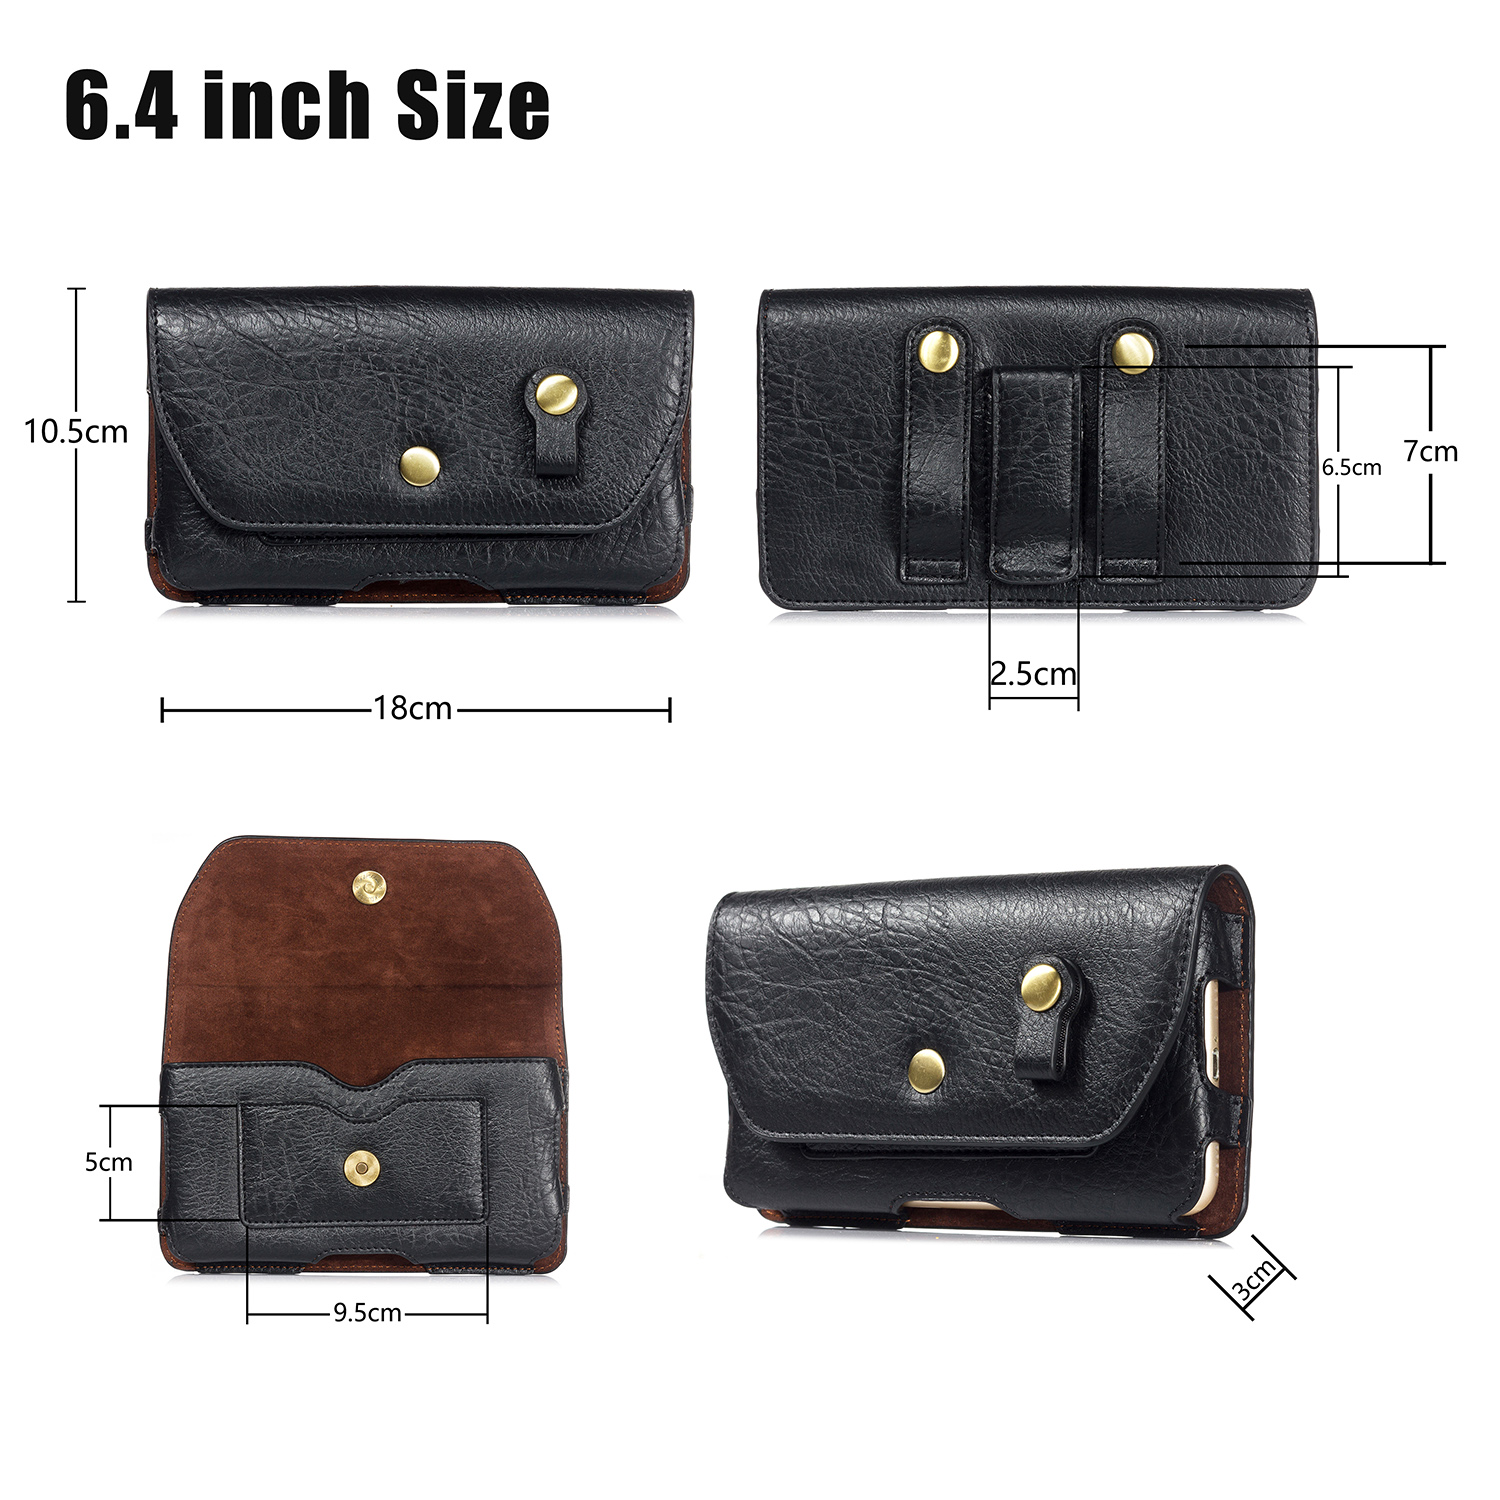 Bakeey-Casual-Vintage-Bussiness-64-inch-Multifunctional-with-Card-Slot-PU-Leather-Mobile-Phone-Money-1692762-4